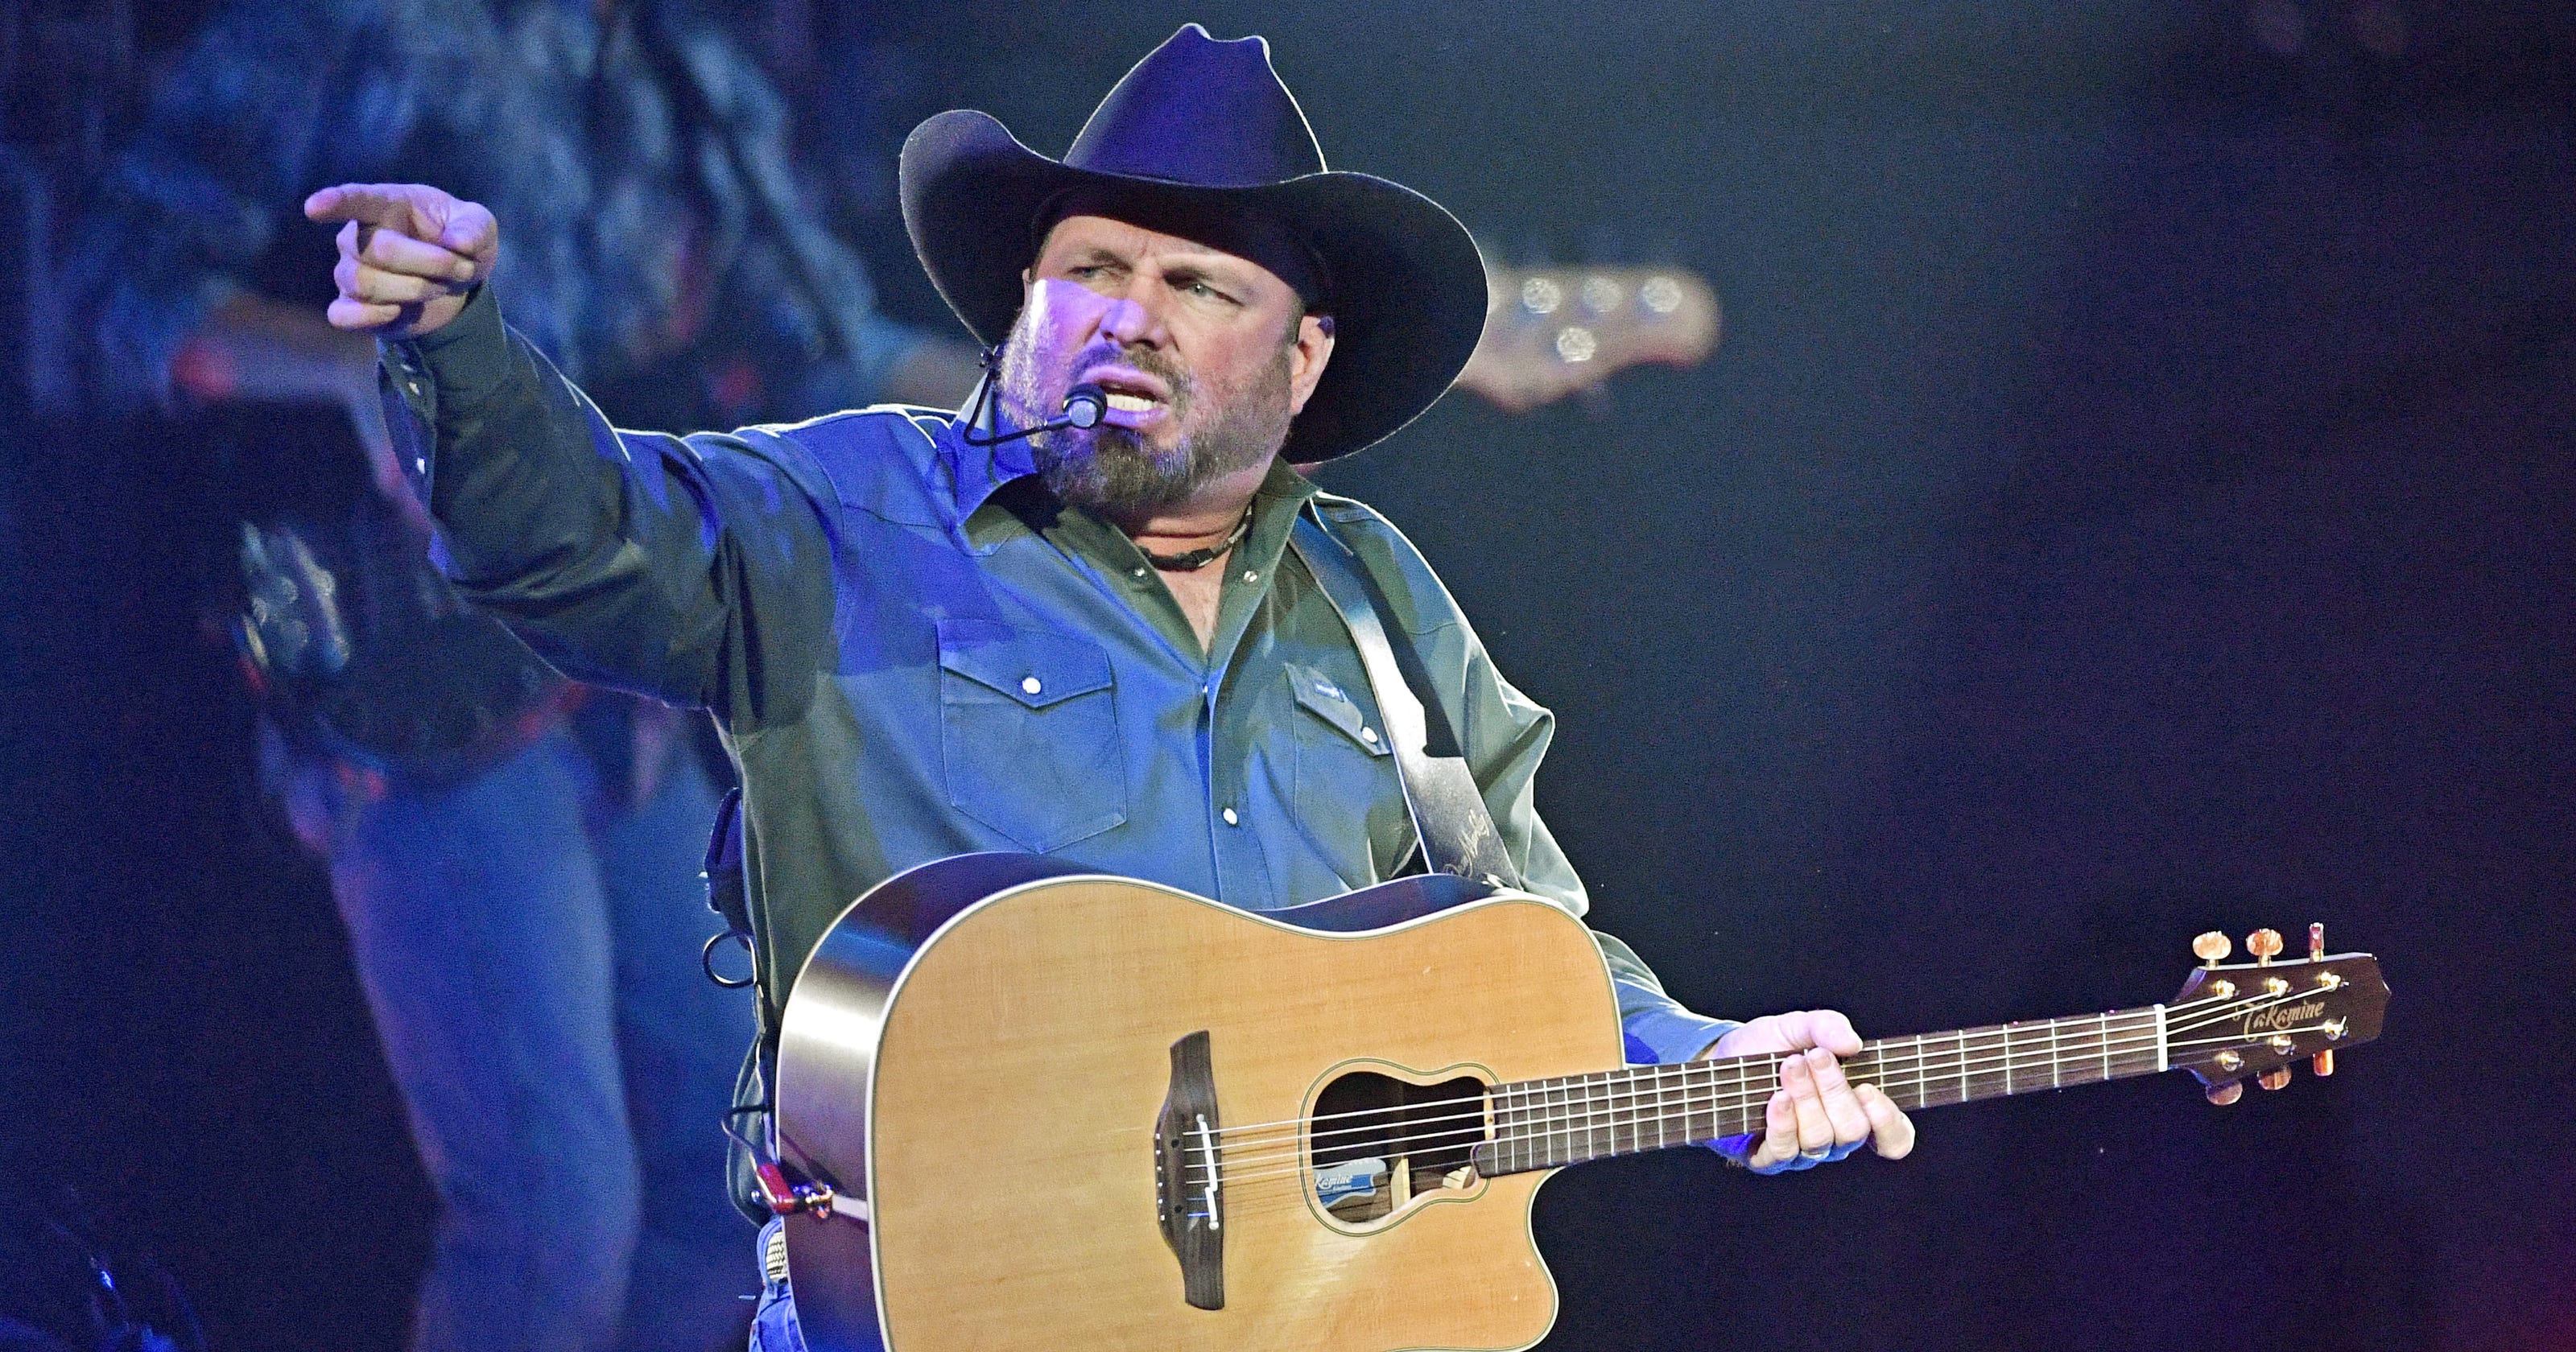 Garth Brooks sells 70,000 tickets to set Ford Field concert record